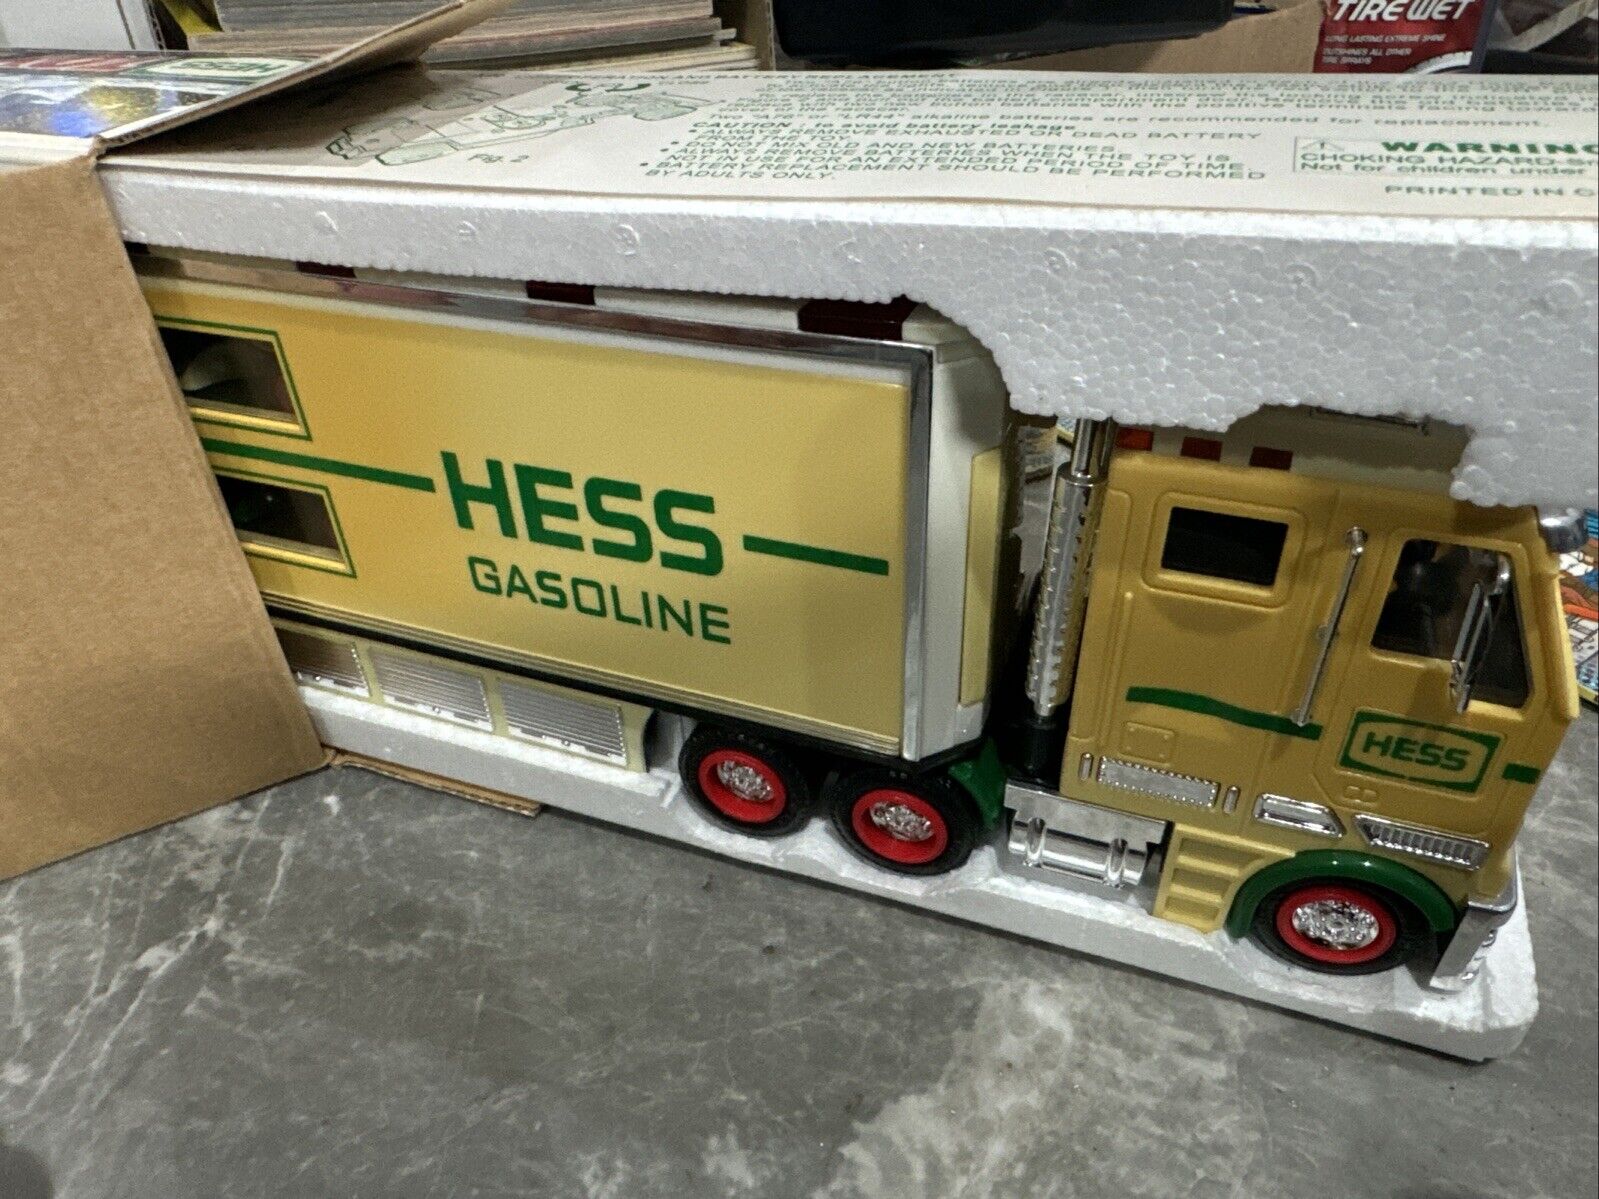 1997 HESS Toy Truck and Racers in Original Box